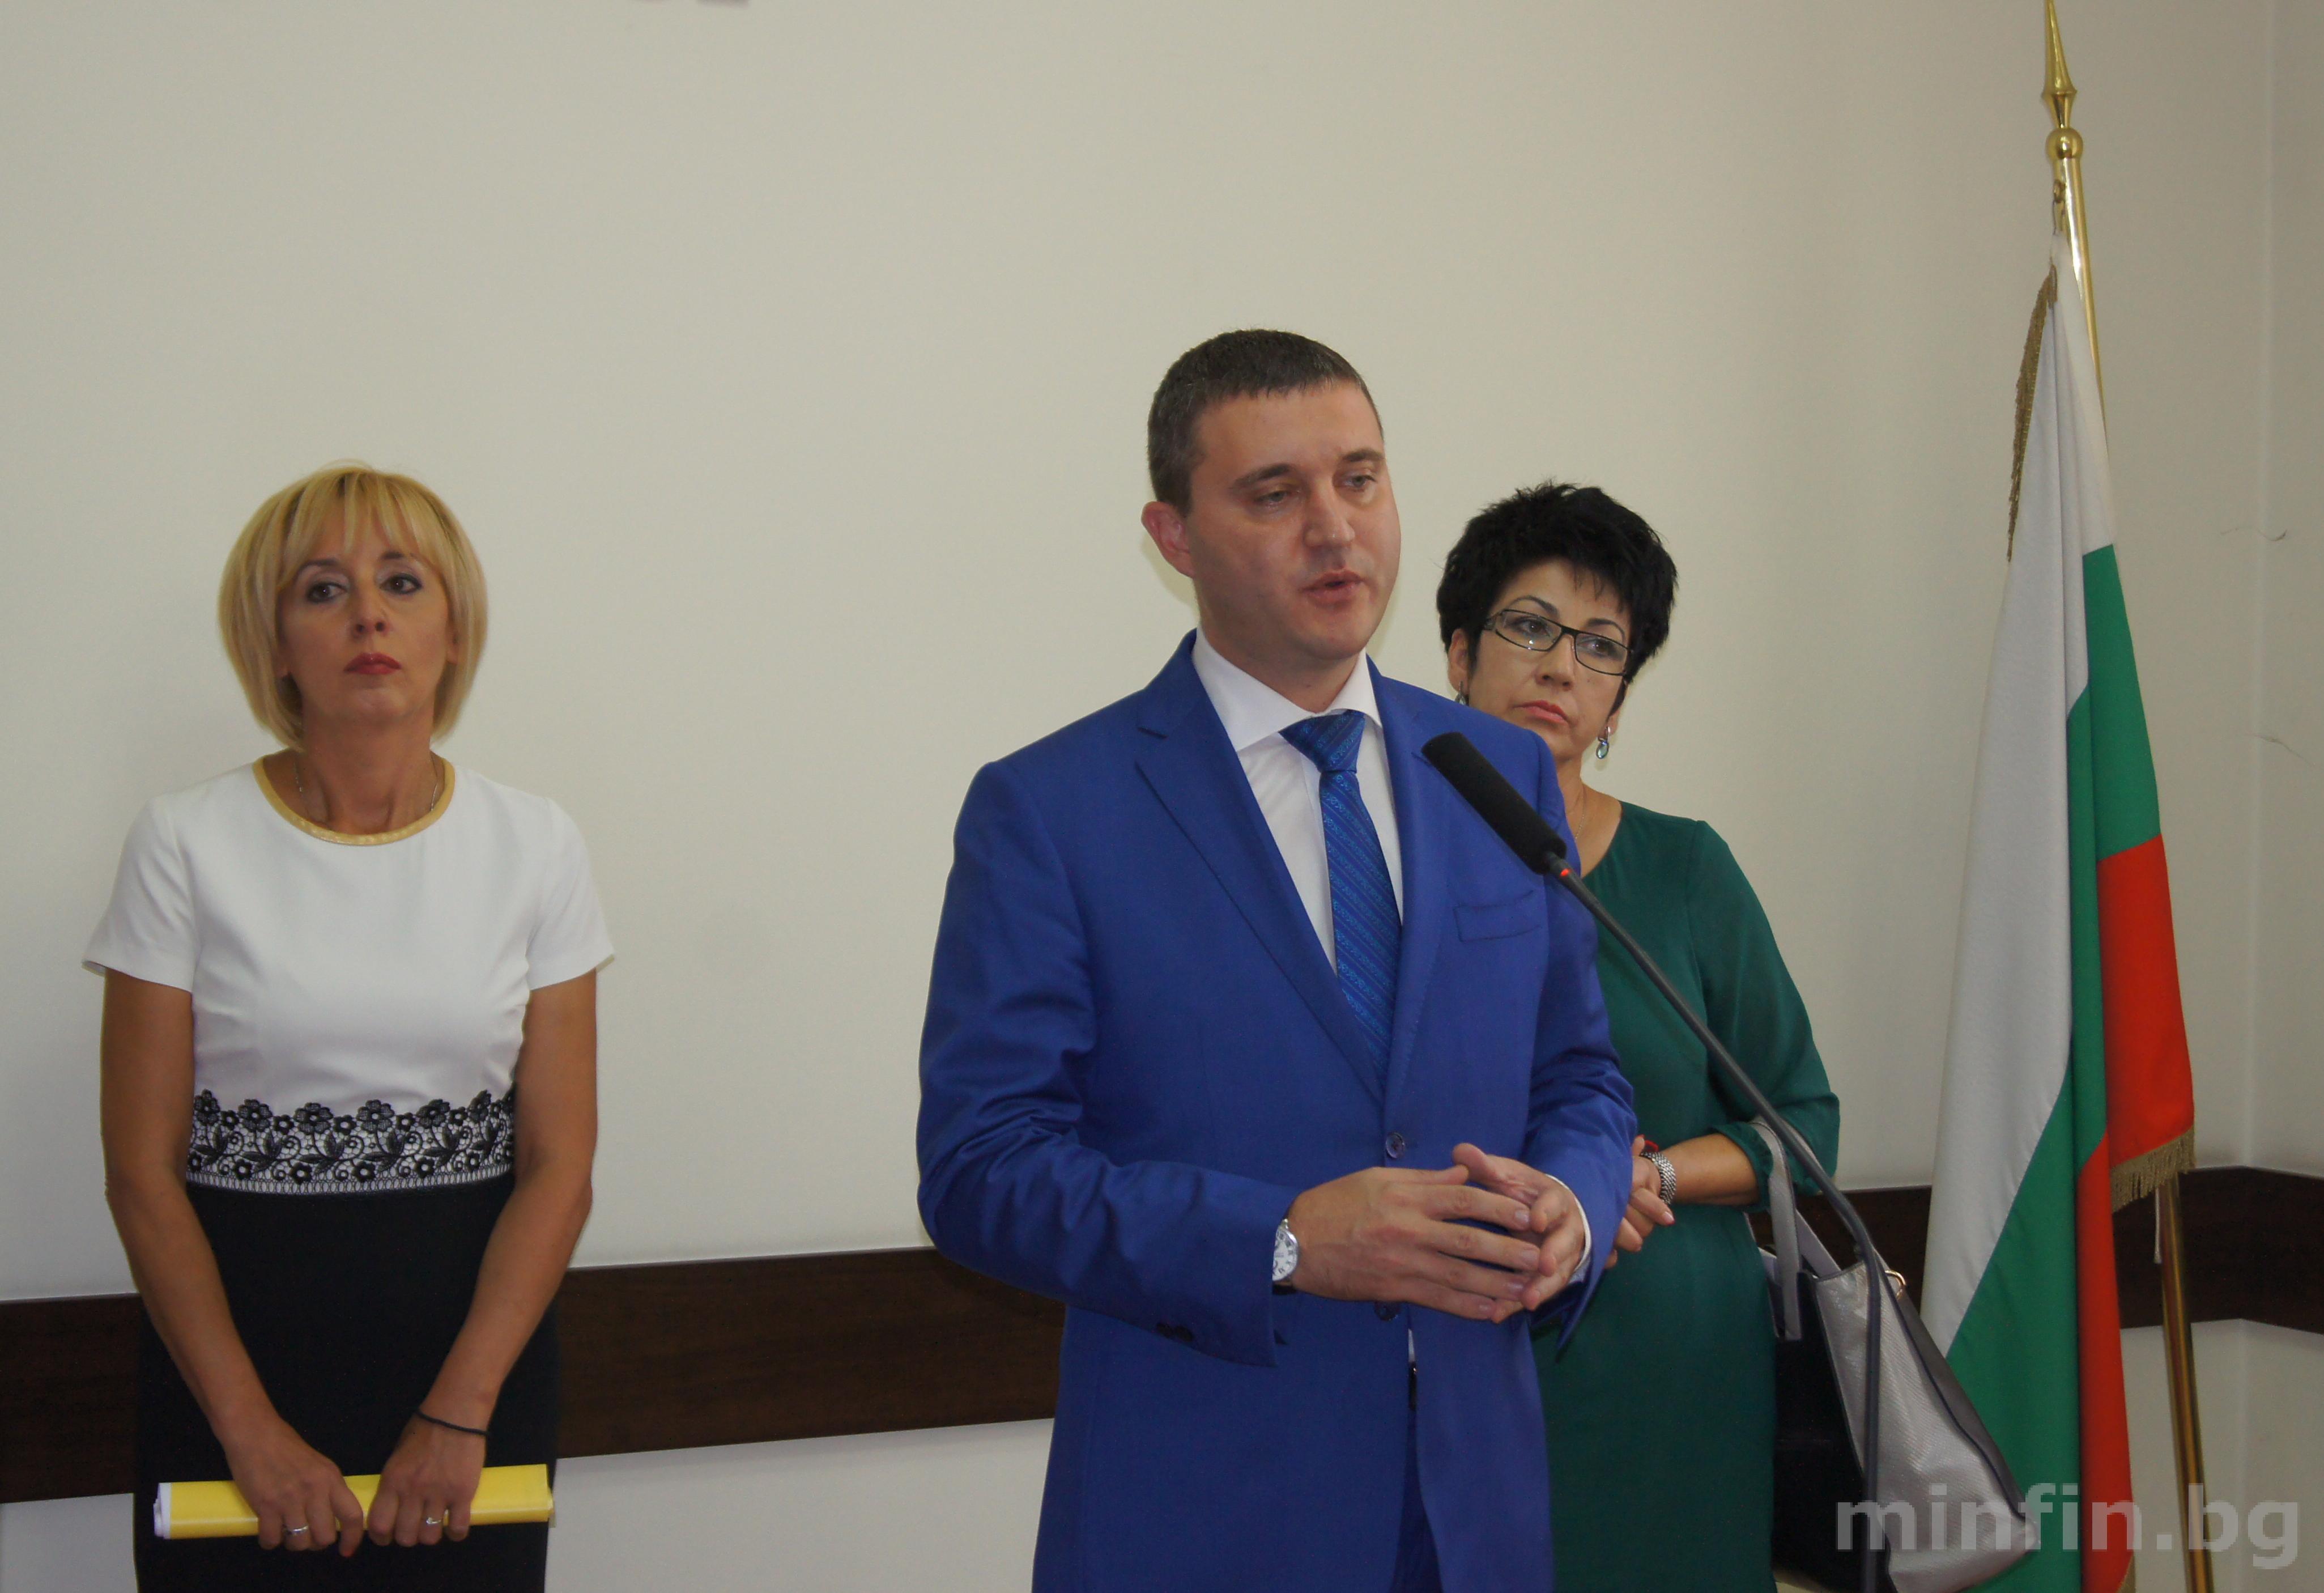 VLADISLAV GORANOV: WE PROPOSE A CLEAR MECHANISM FOR FOOD BANKING AND CONTROL OVER DONATED FOOD